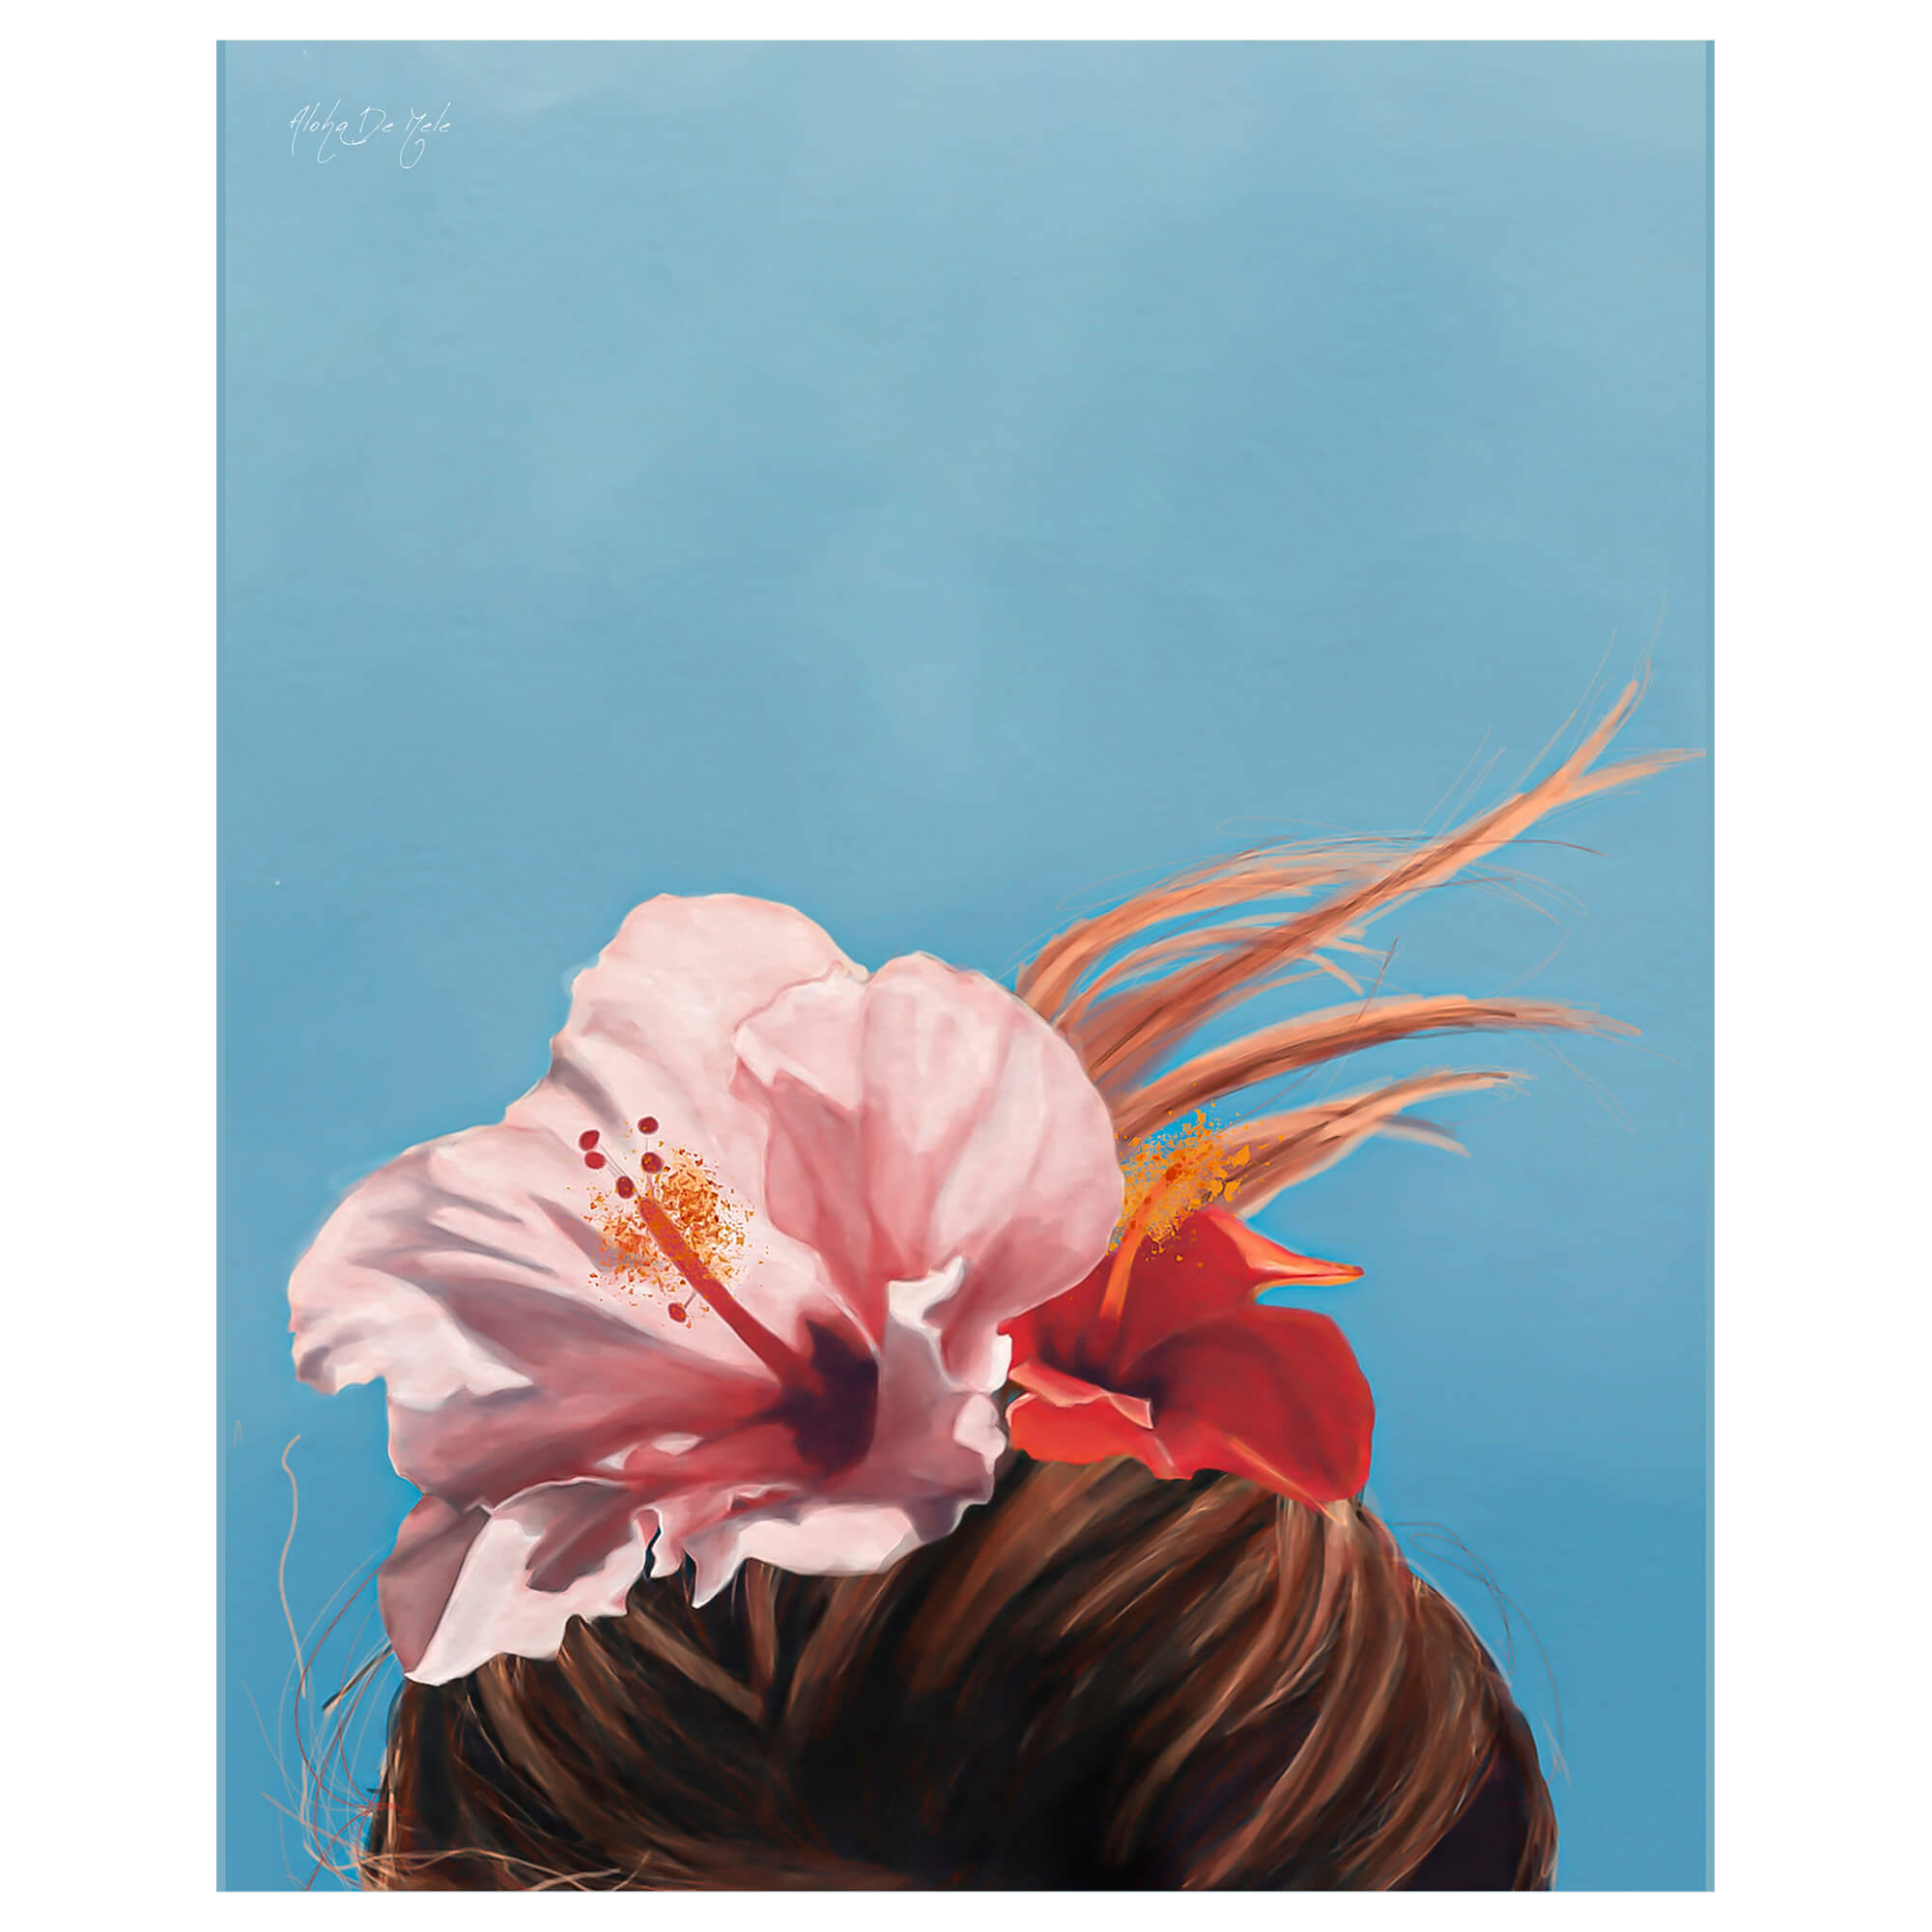 A matted art print of a woman's hair with colorful hibiscus flowers by Hawaii artist Aloha De Mele